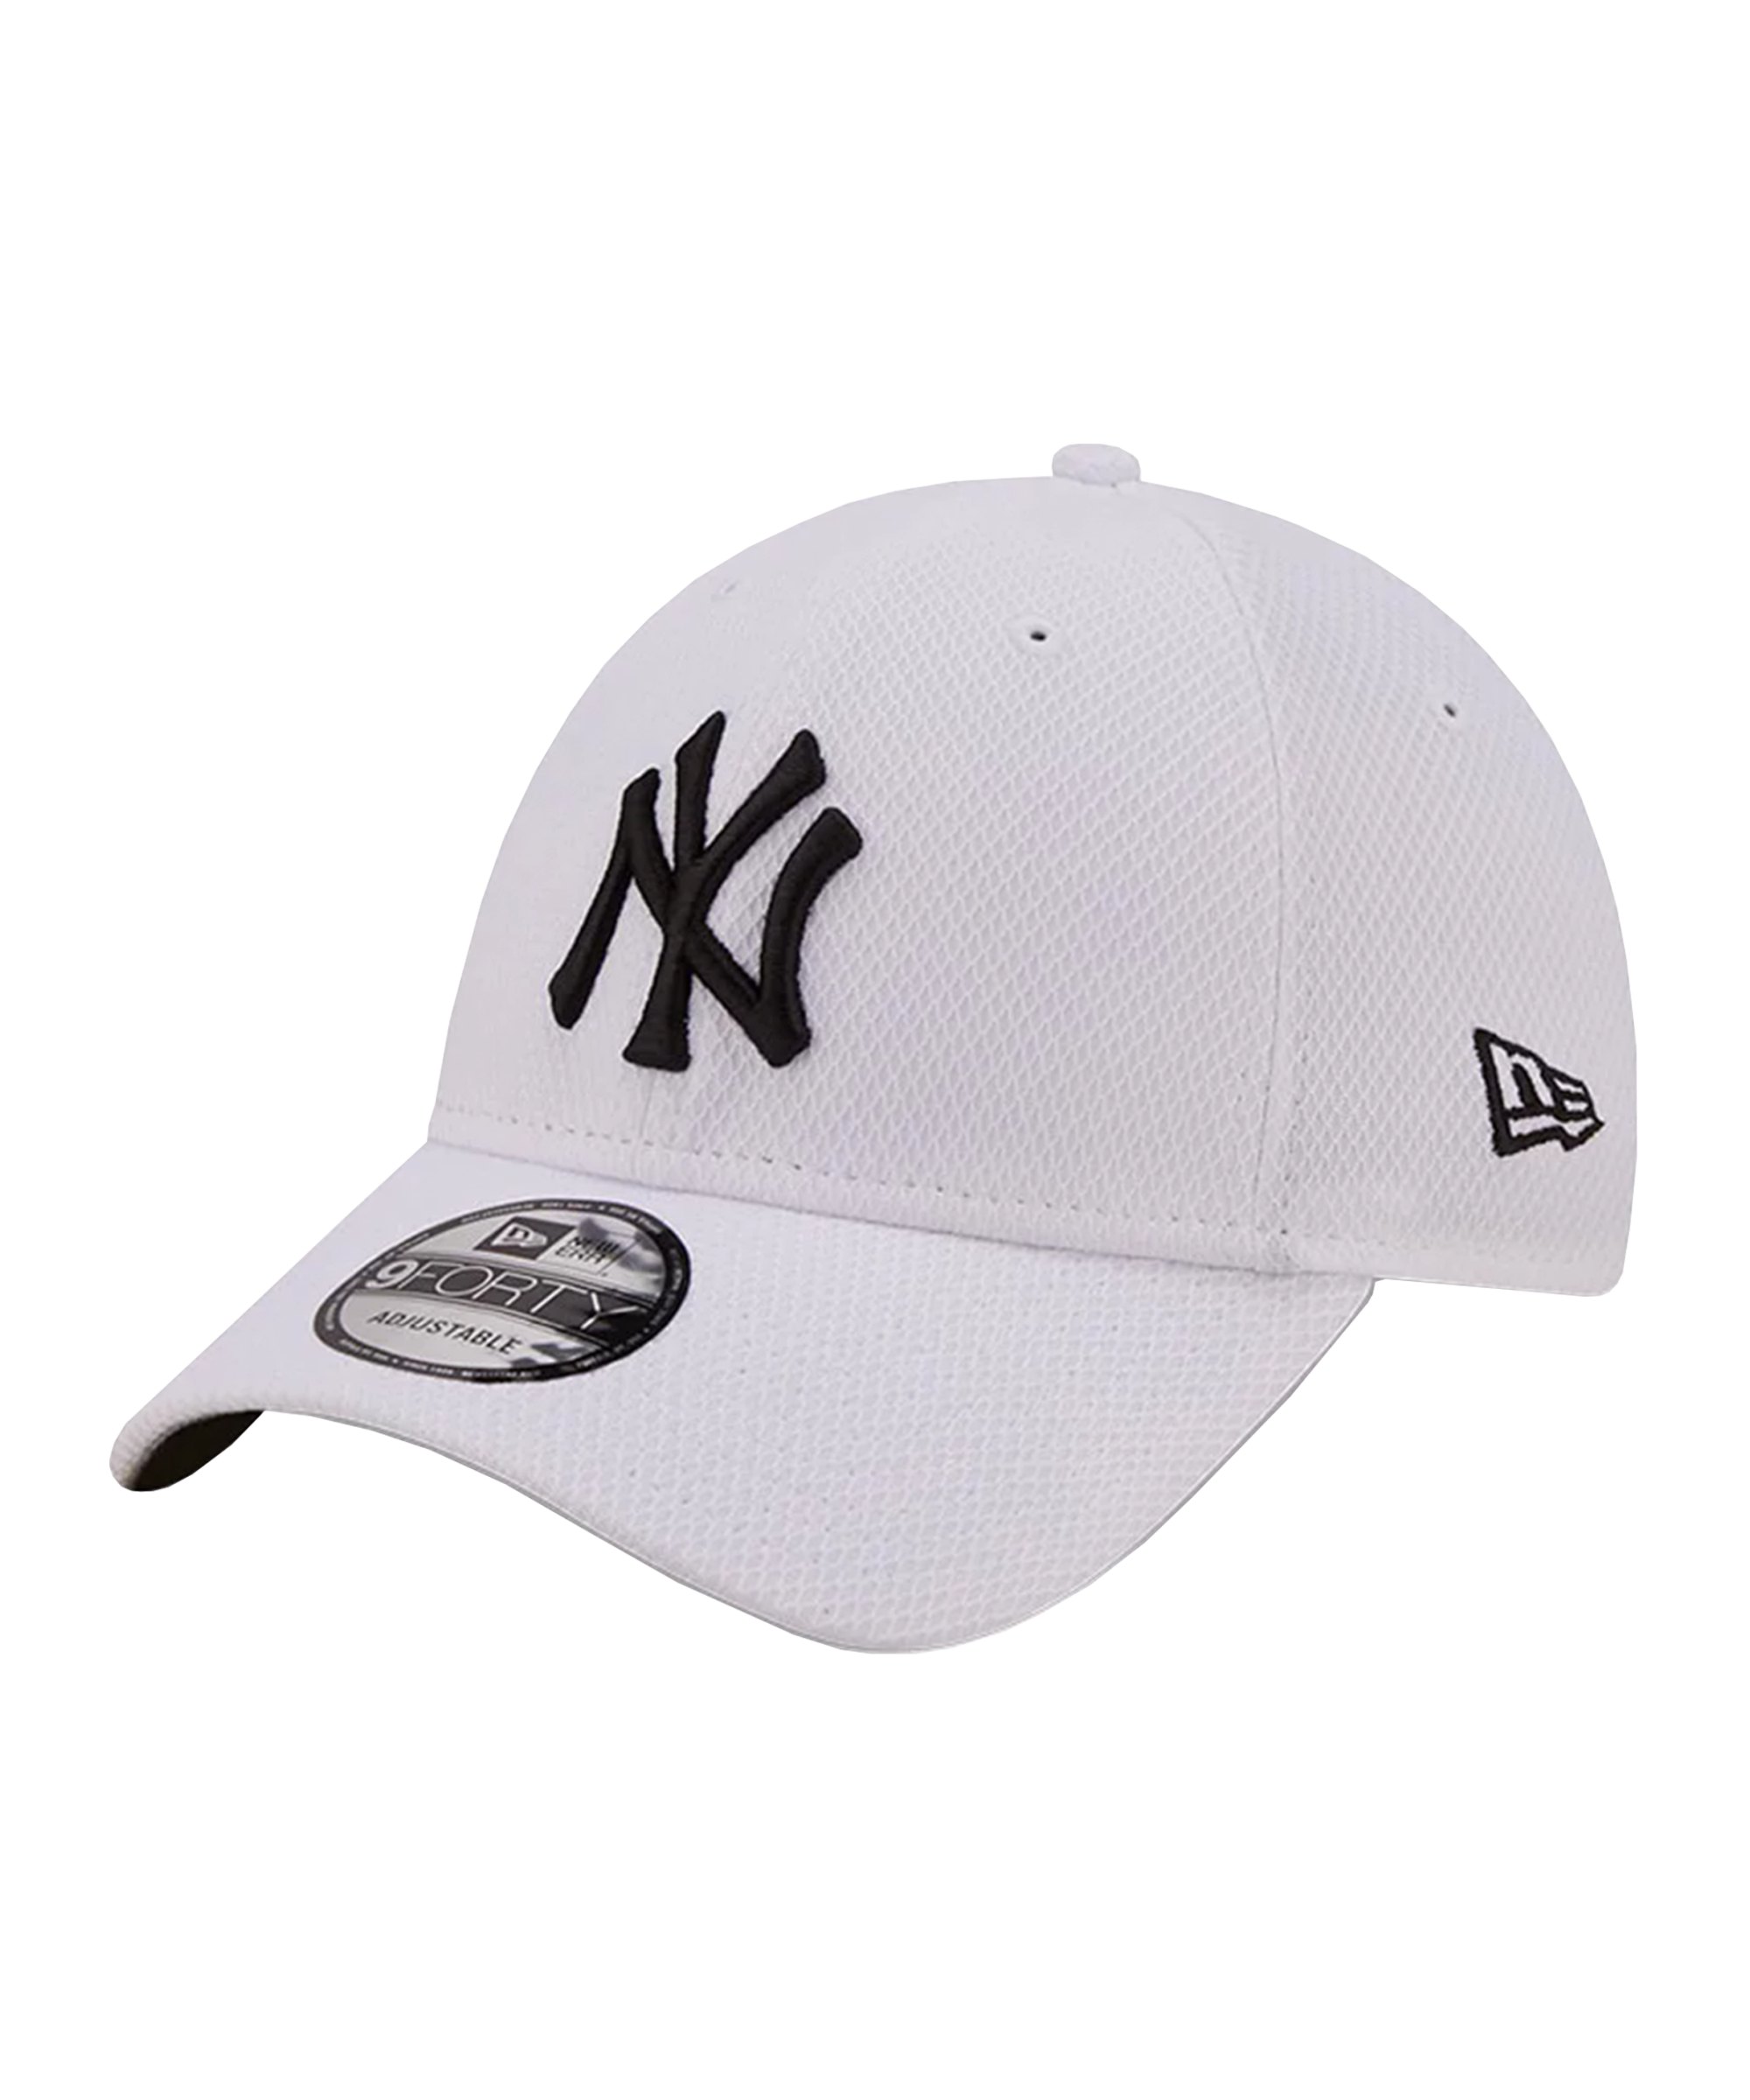 New Era NY Yankees Diamond 9Forty Cap FWHINVY - weiss